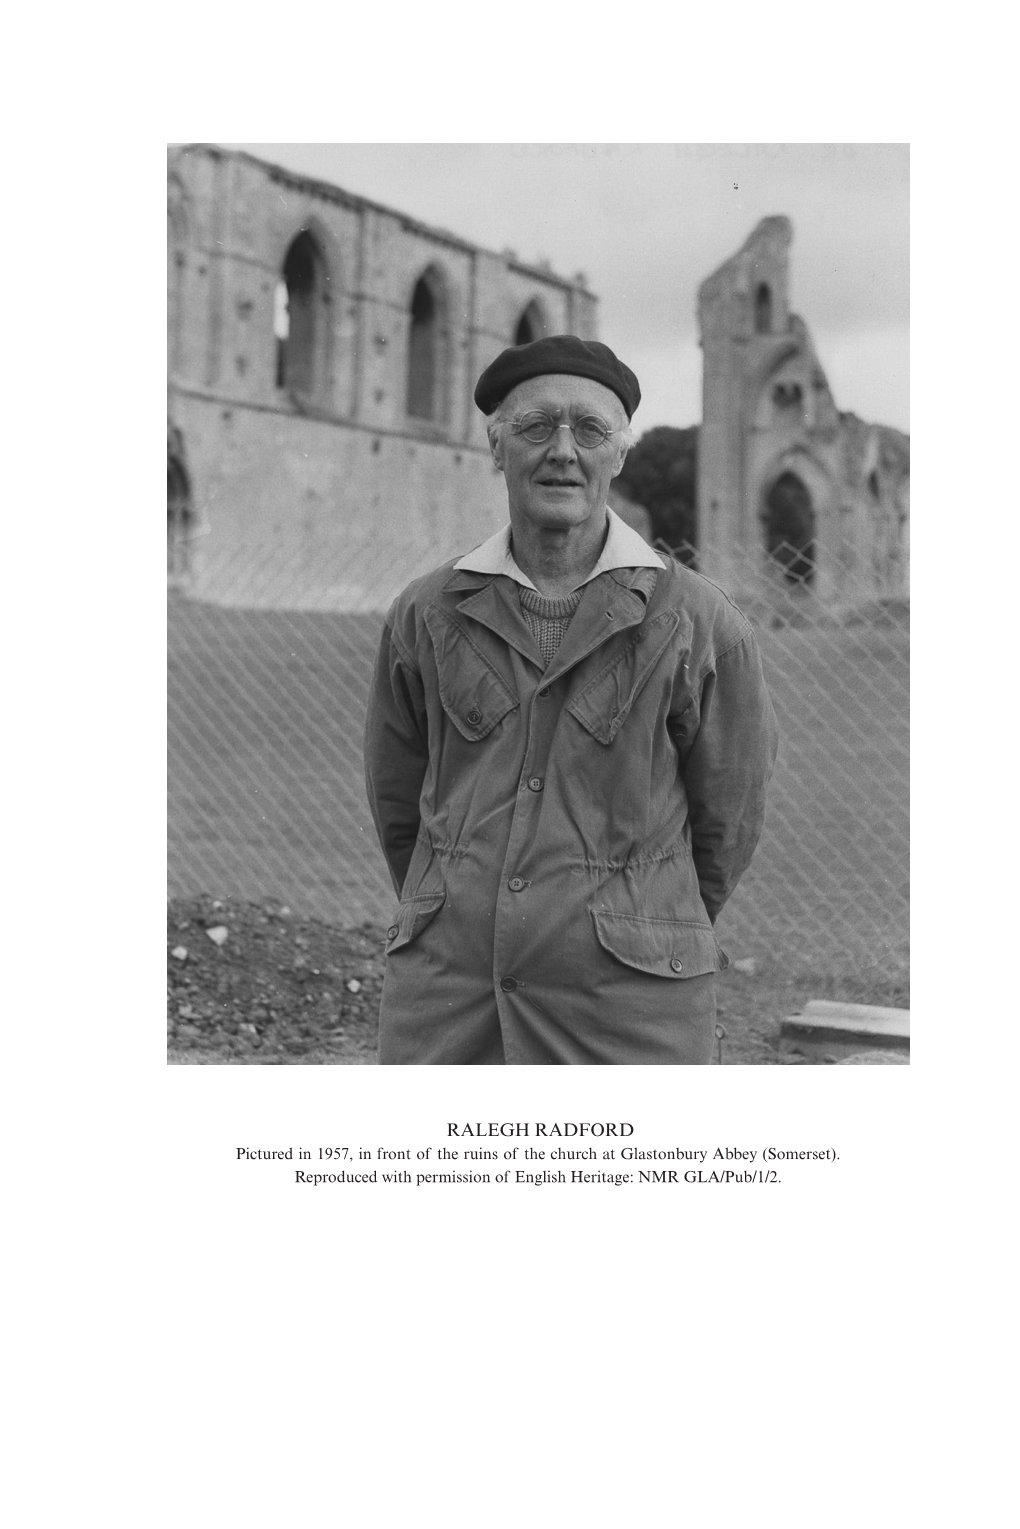 RALEGH RADFORD Pictured in 1957, in Front of the Ruins of the Church at Glastonbury Abbey (Somerset)